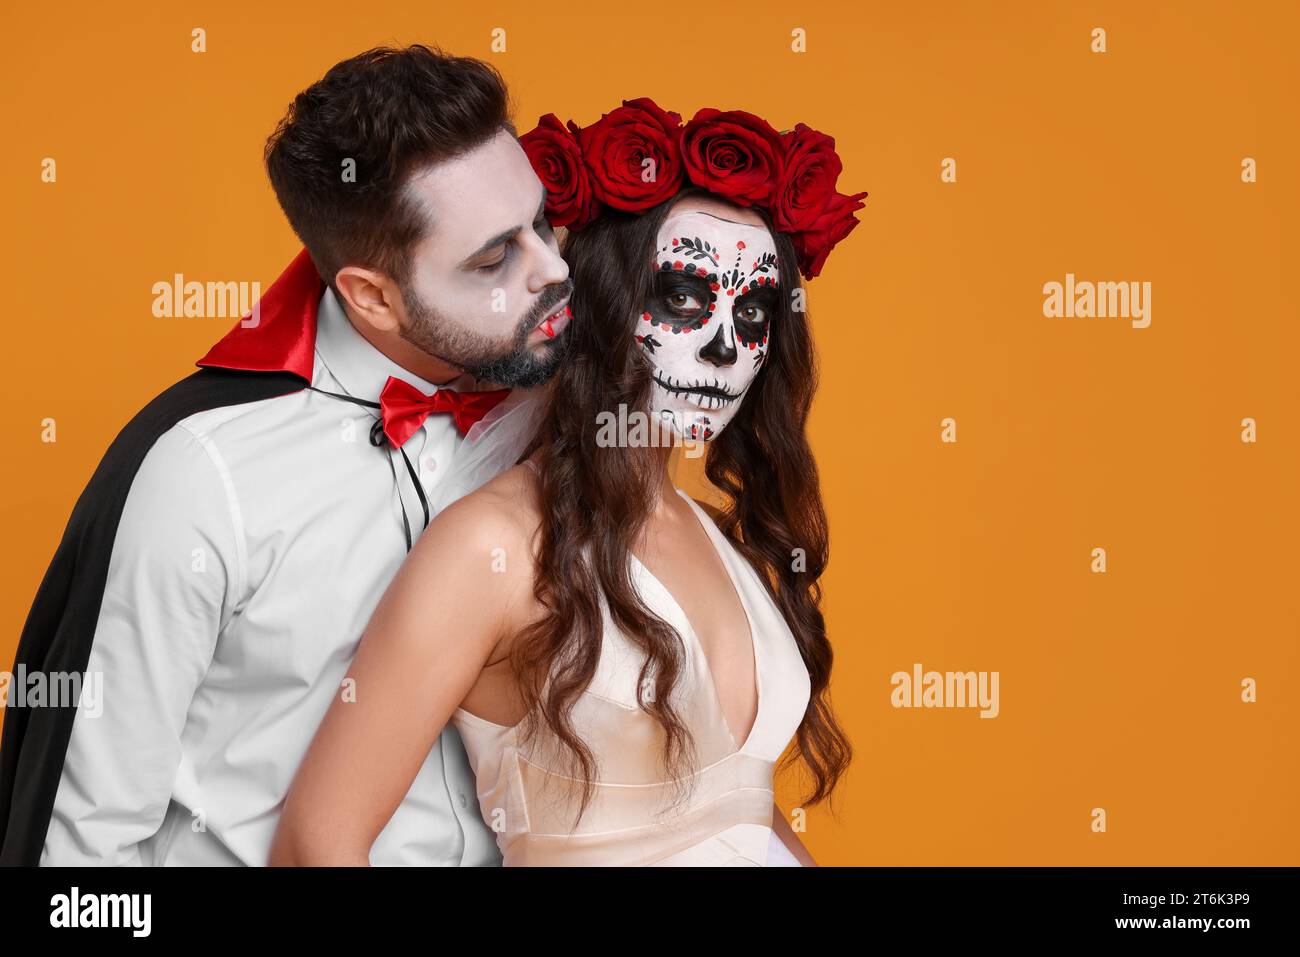 Couple in scary bride and vampire costumes on orange background, space for text. Halloween celebration Stock Photo